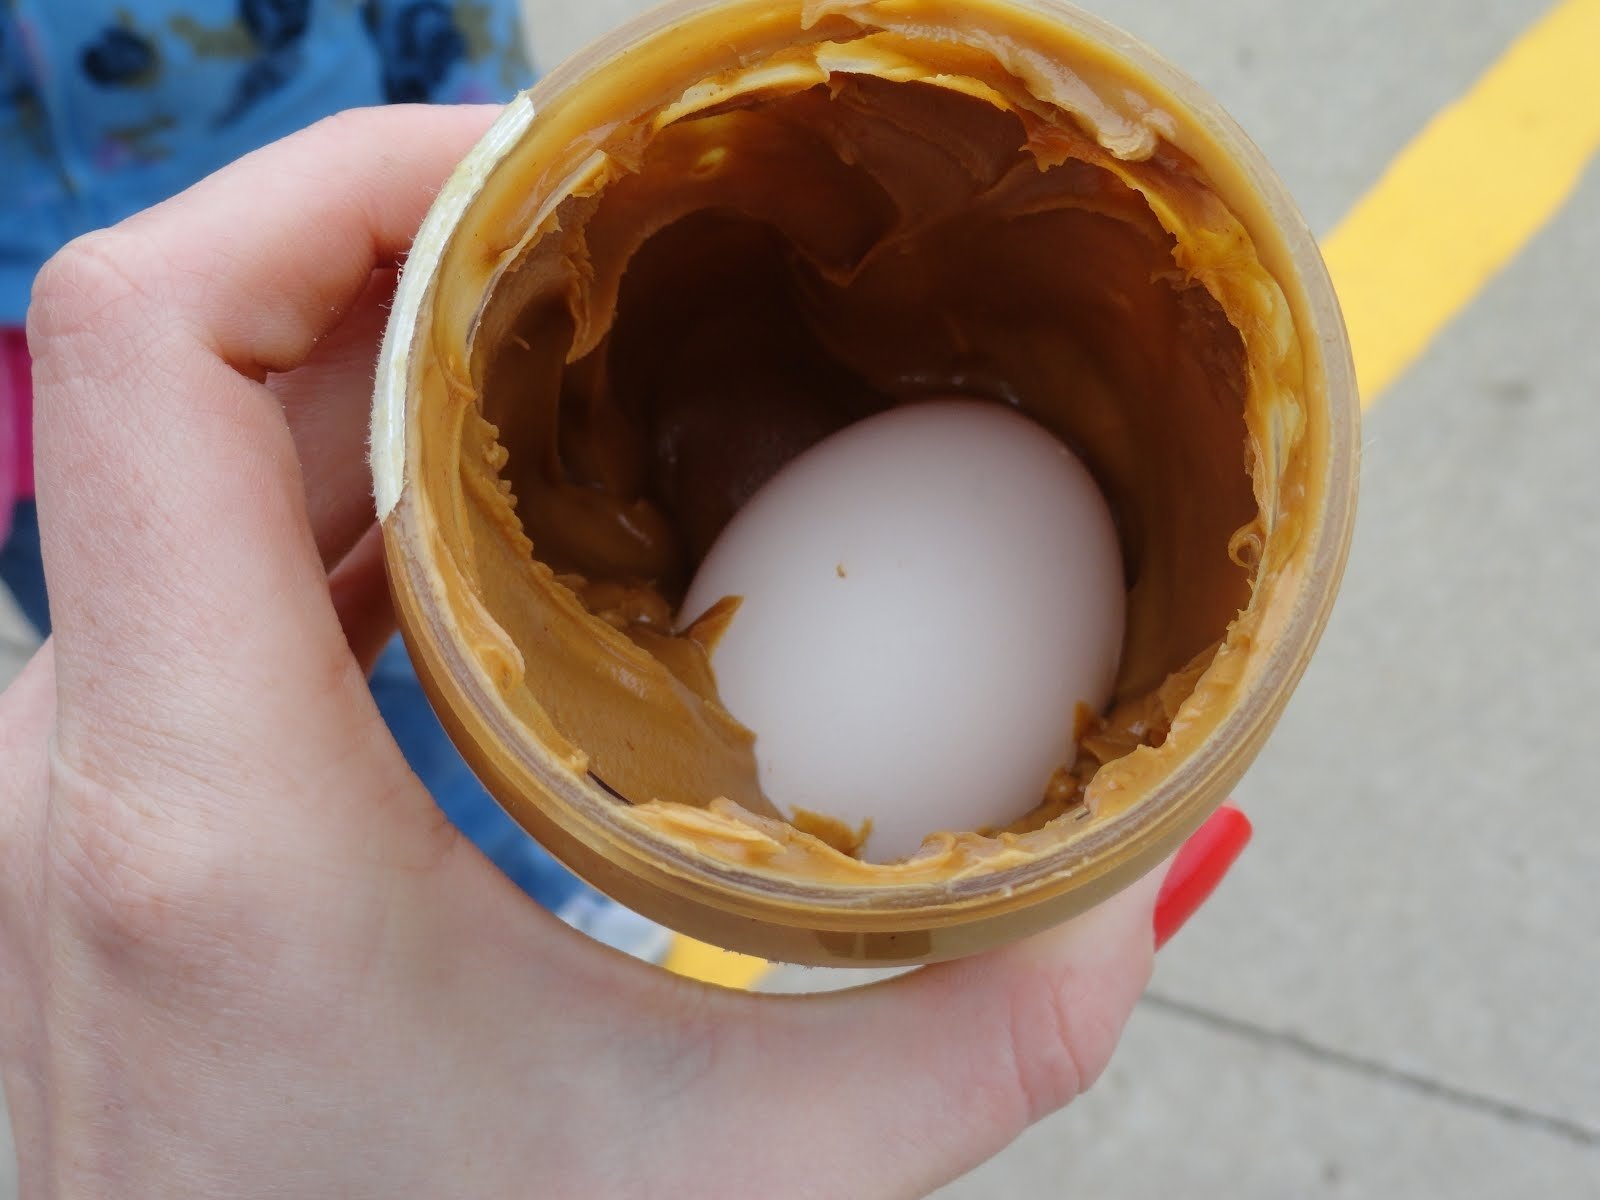 egg drop project ideas that work